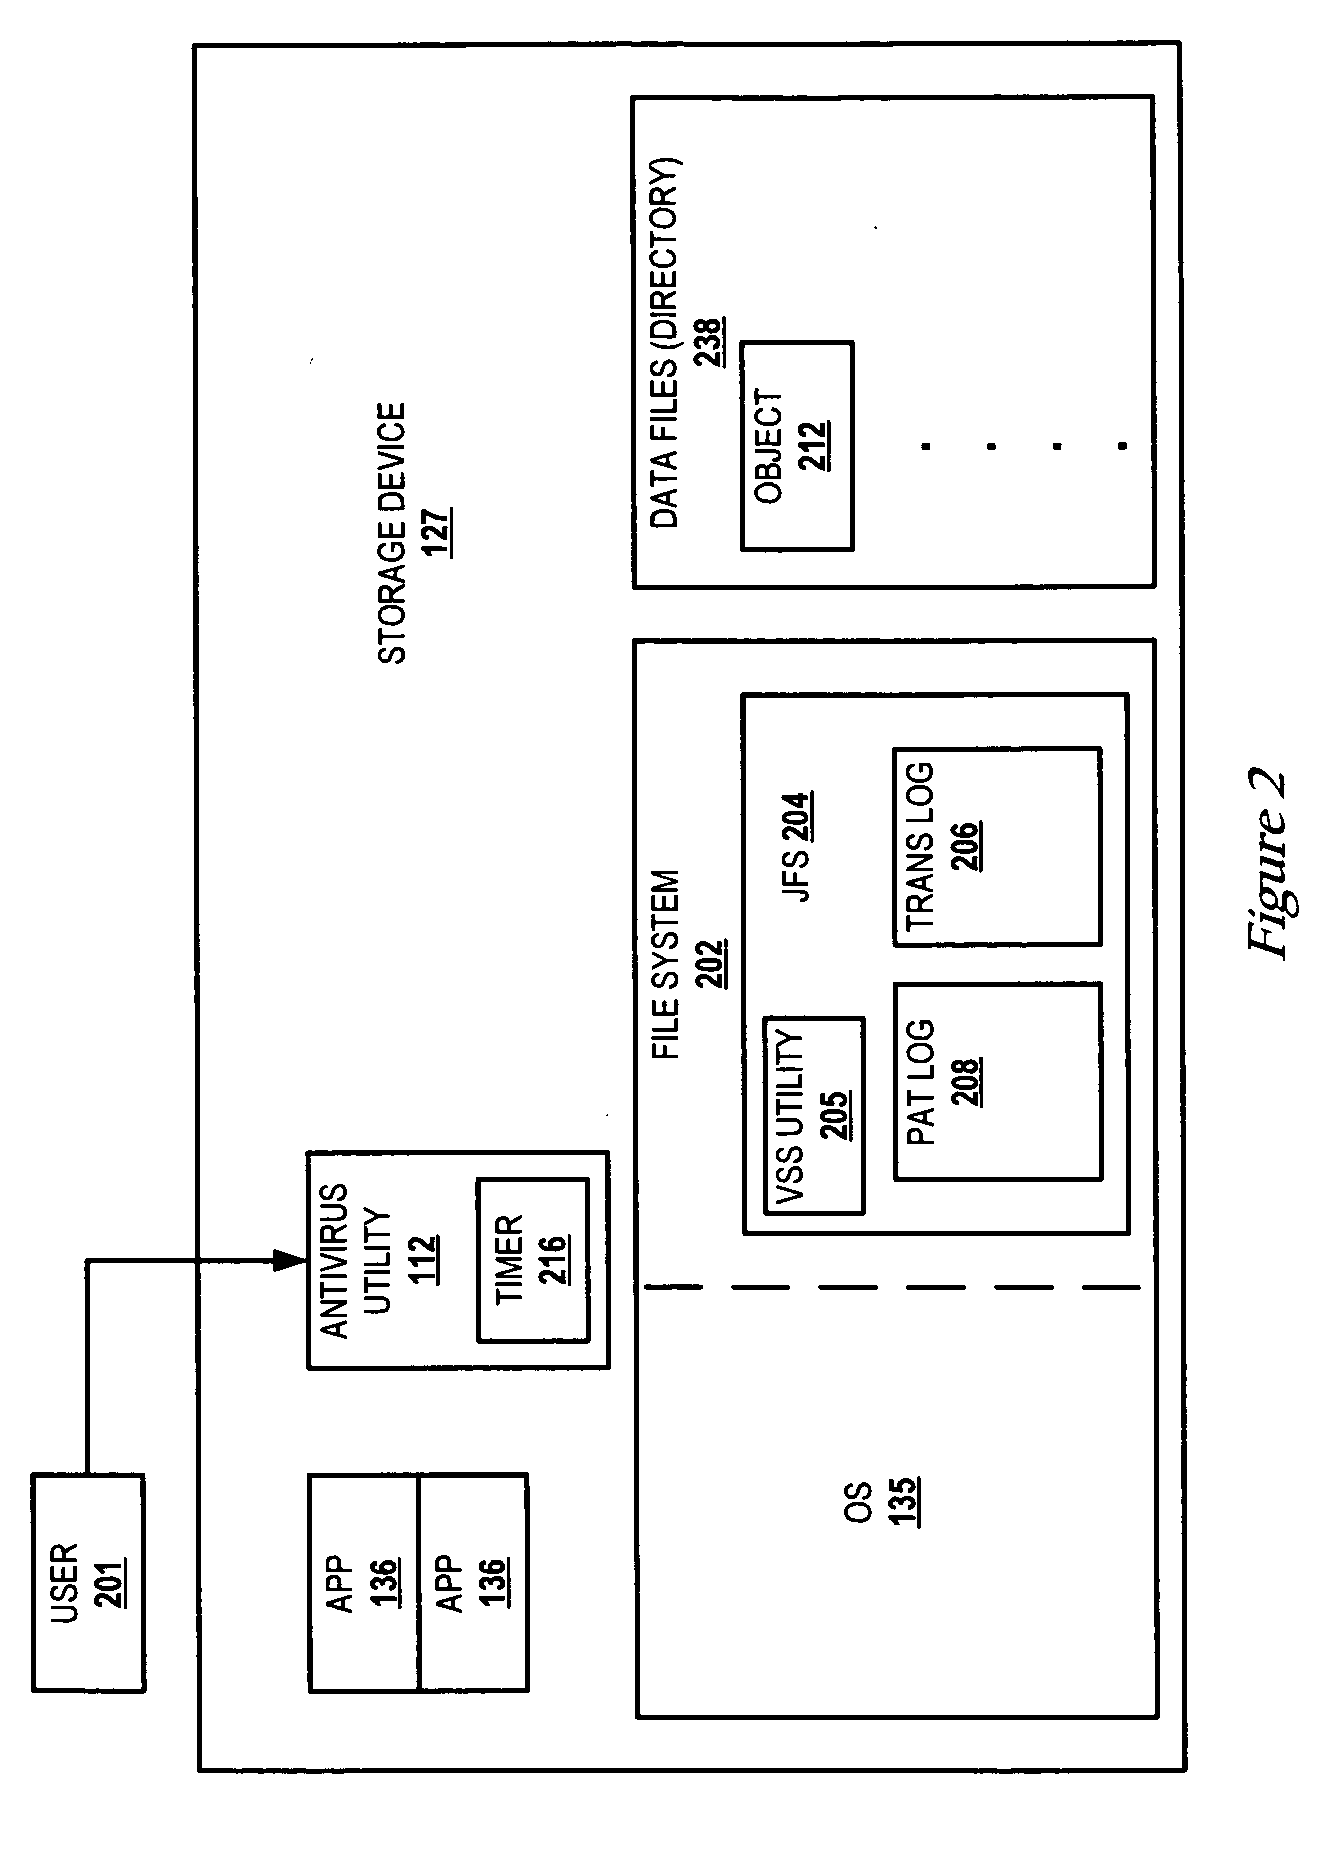 Method/system to speed up antivirus scans using a journal file system